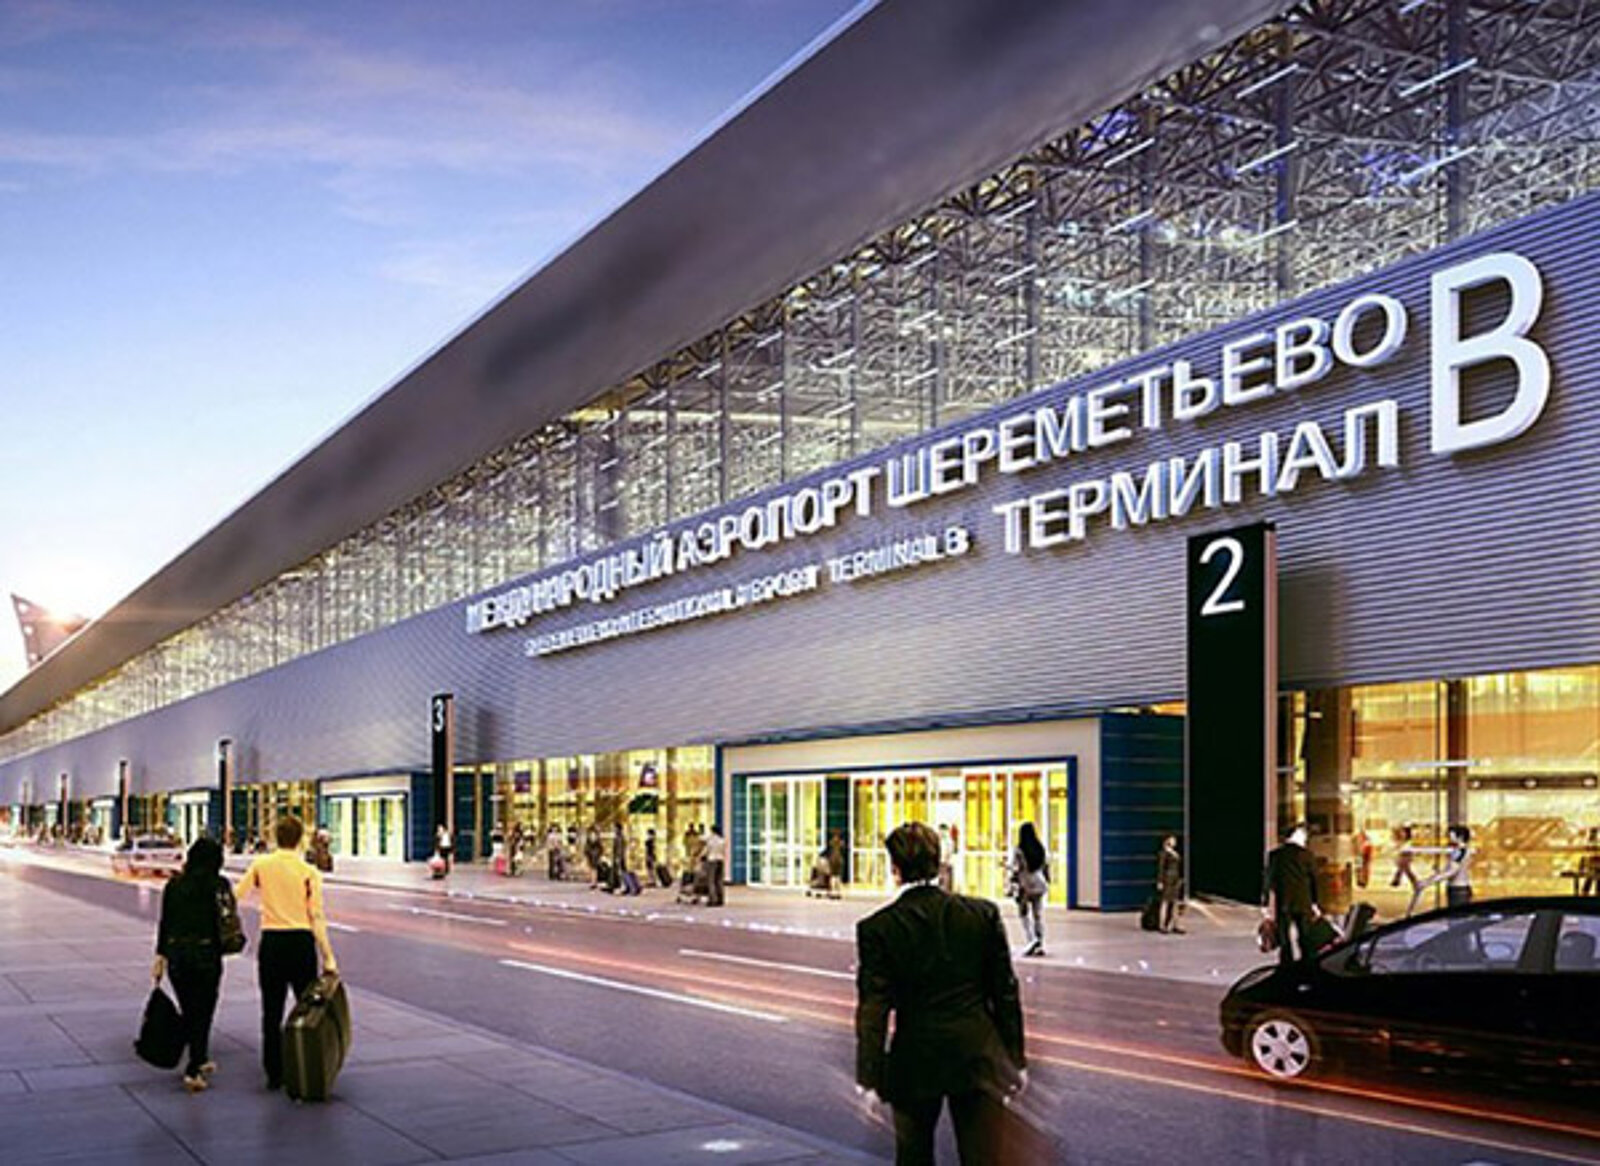 FlowCon Project - New facilities of Sheremetyevo Airport, Russia - for 2018 FIFA World Cup